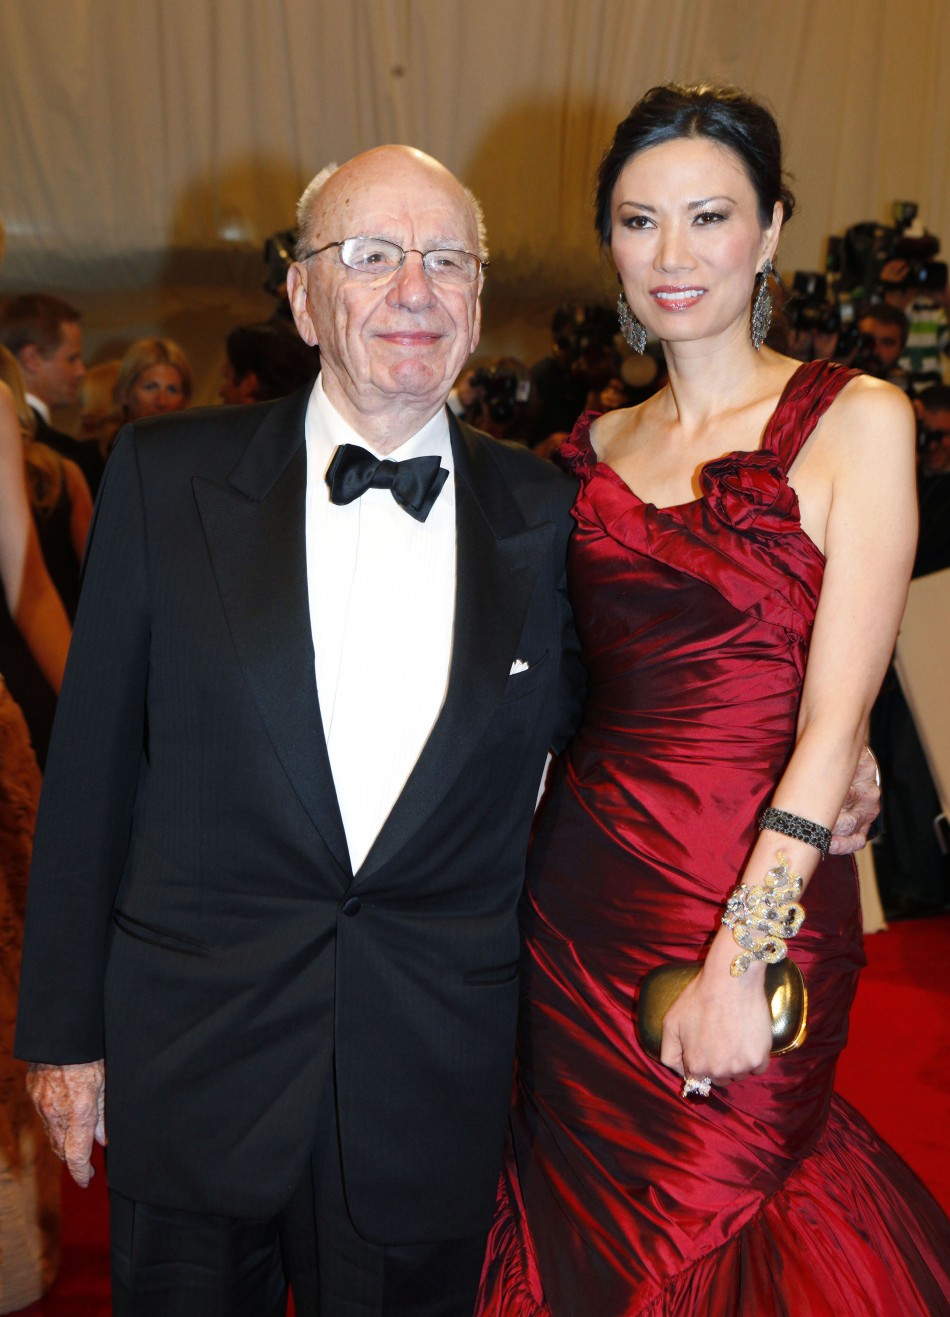 Rupert Murdoch and wife Wendi Deng Murdoch pose on the red carpet at the Metropolitan Museum of Art Costume Institute Benefit celebrating the opening of Alexander McQueen Savage Beauty in New York